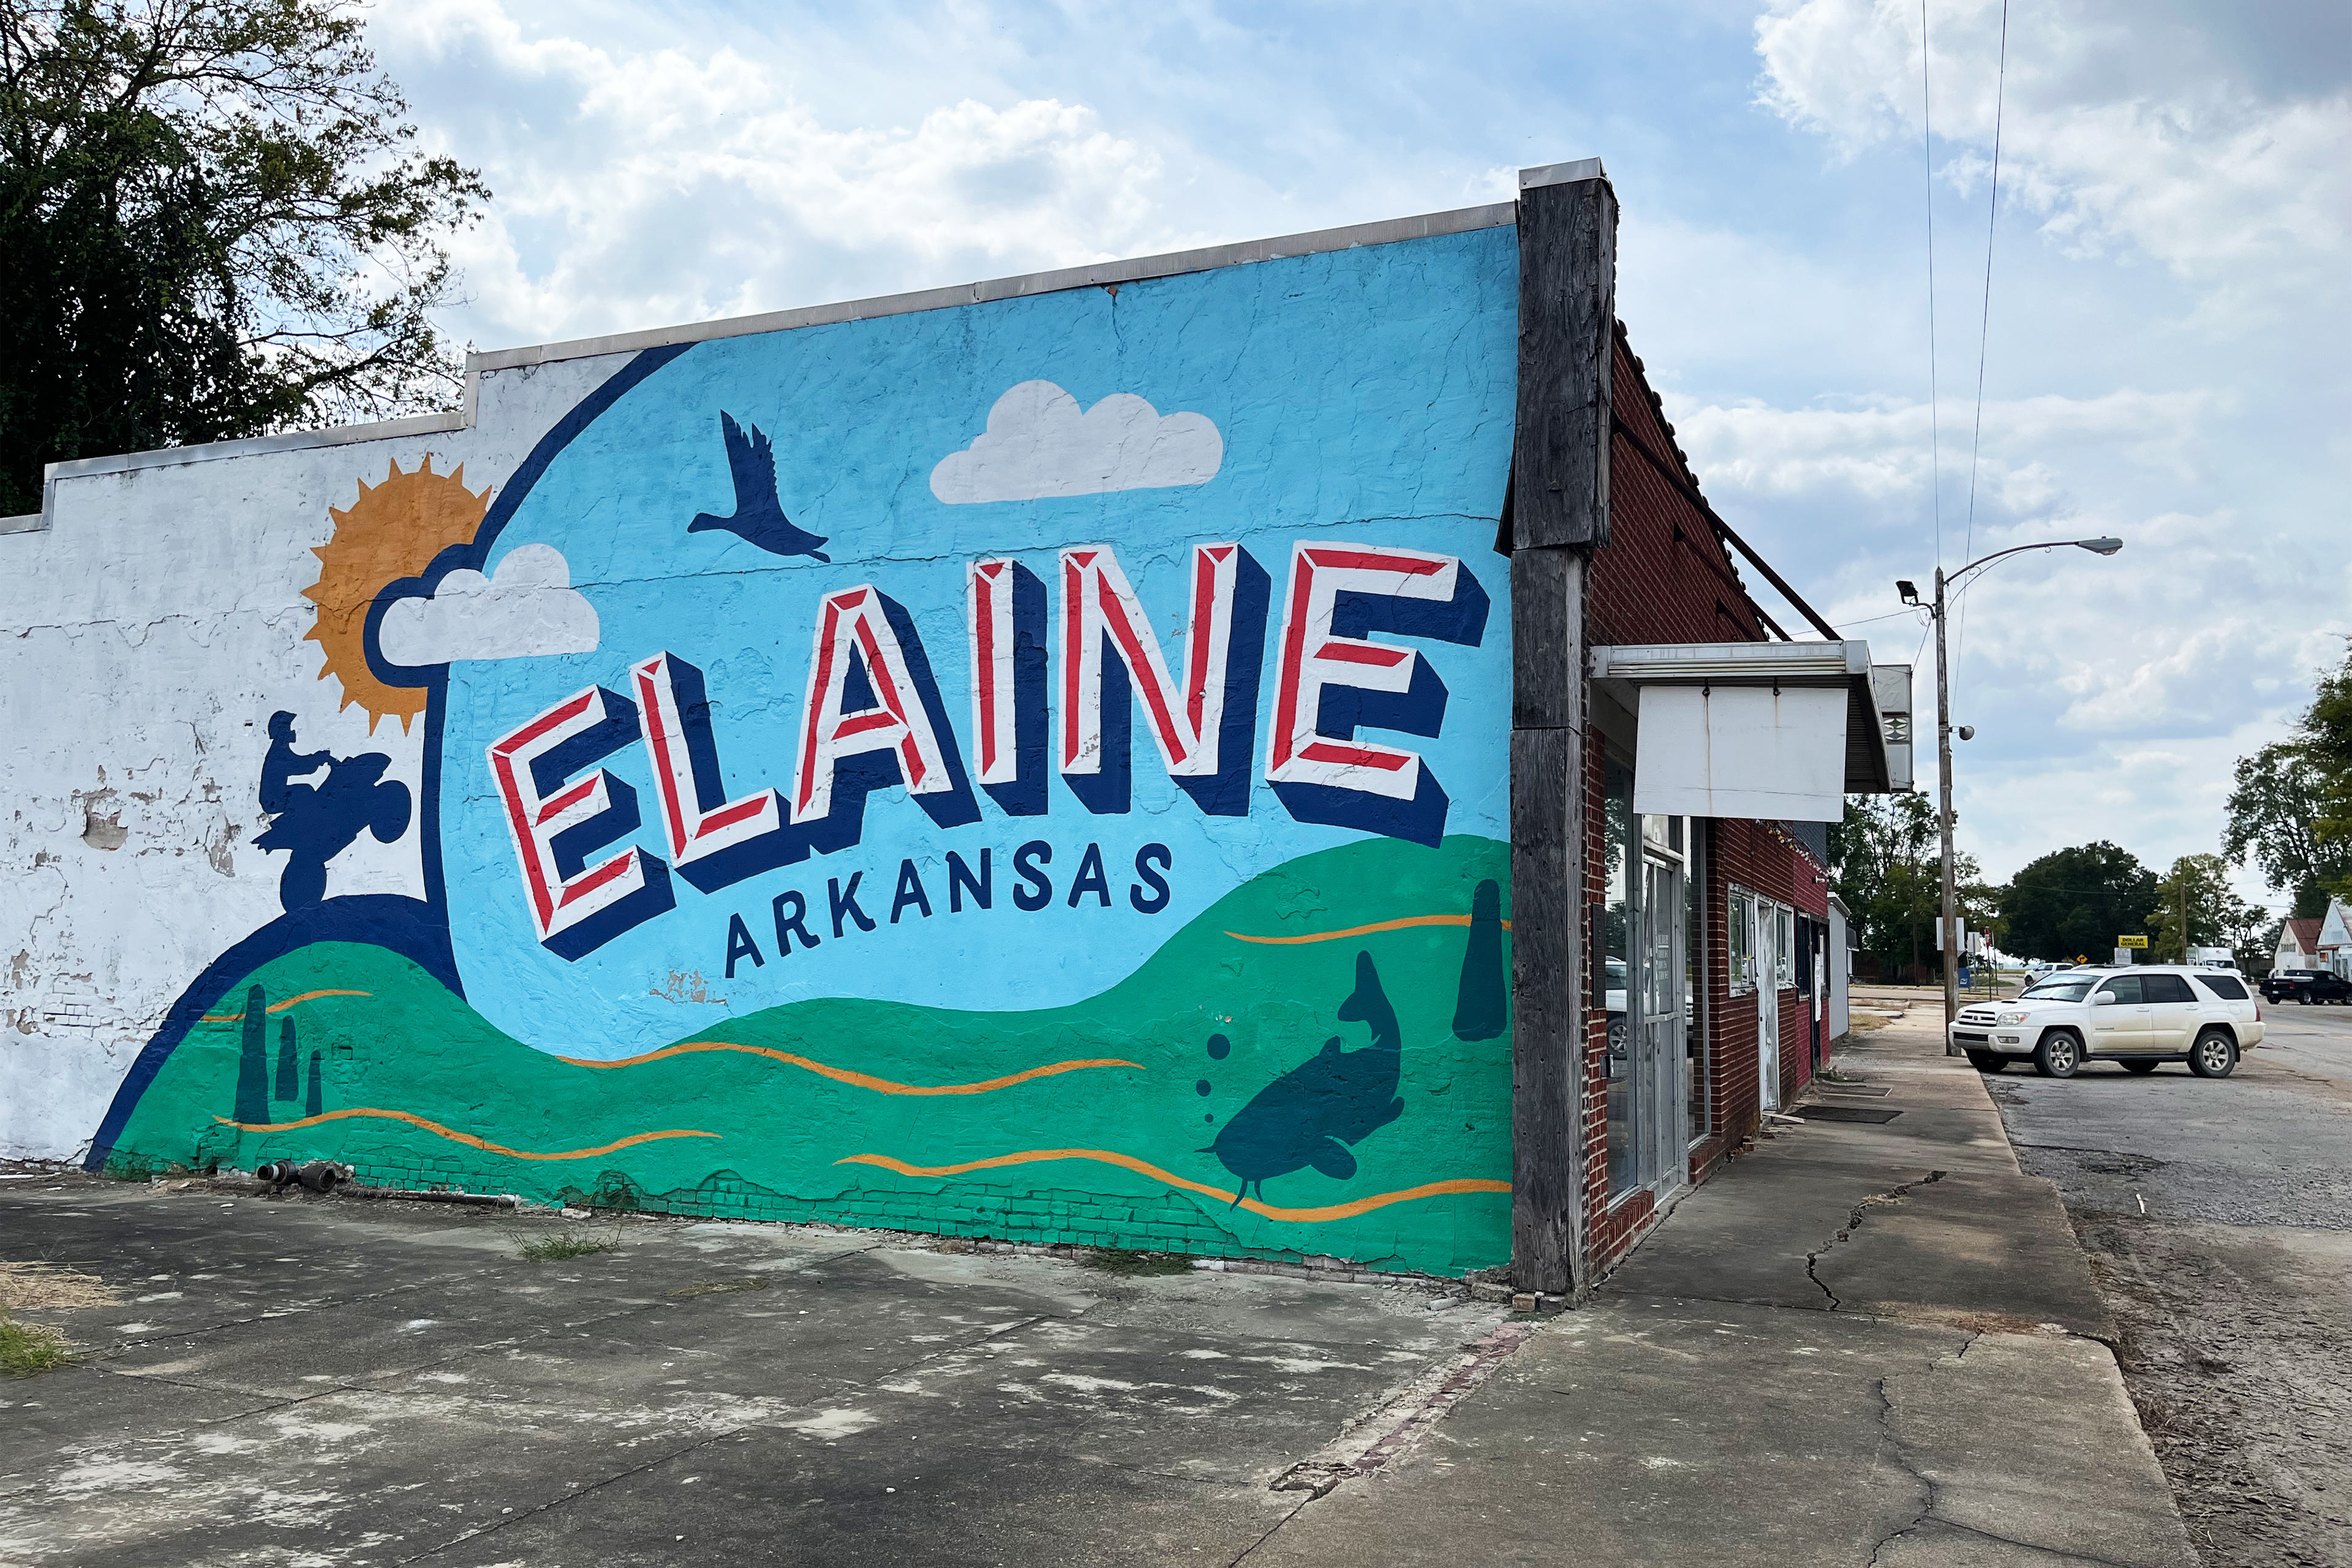 A photo of a colorful mural that reads, "Elaine, Arkansas," painted on the side of a building.